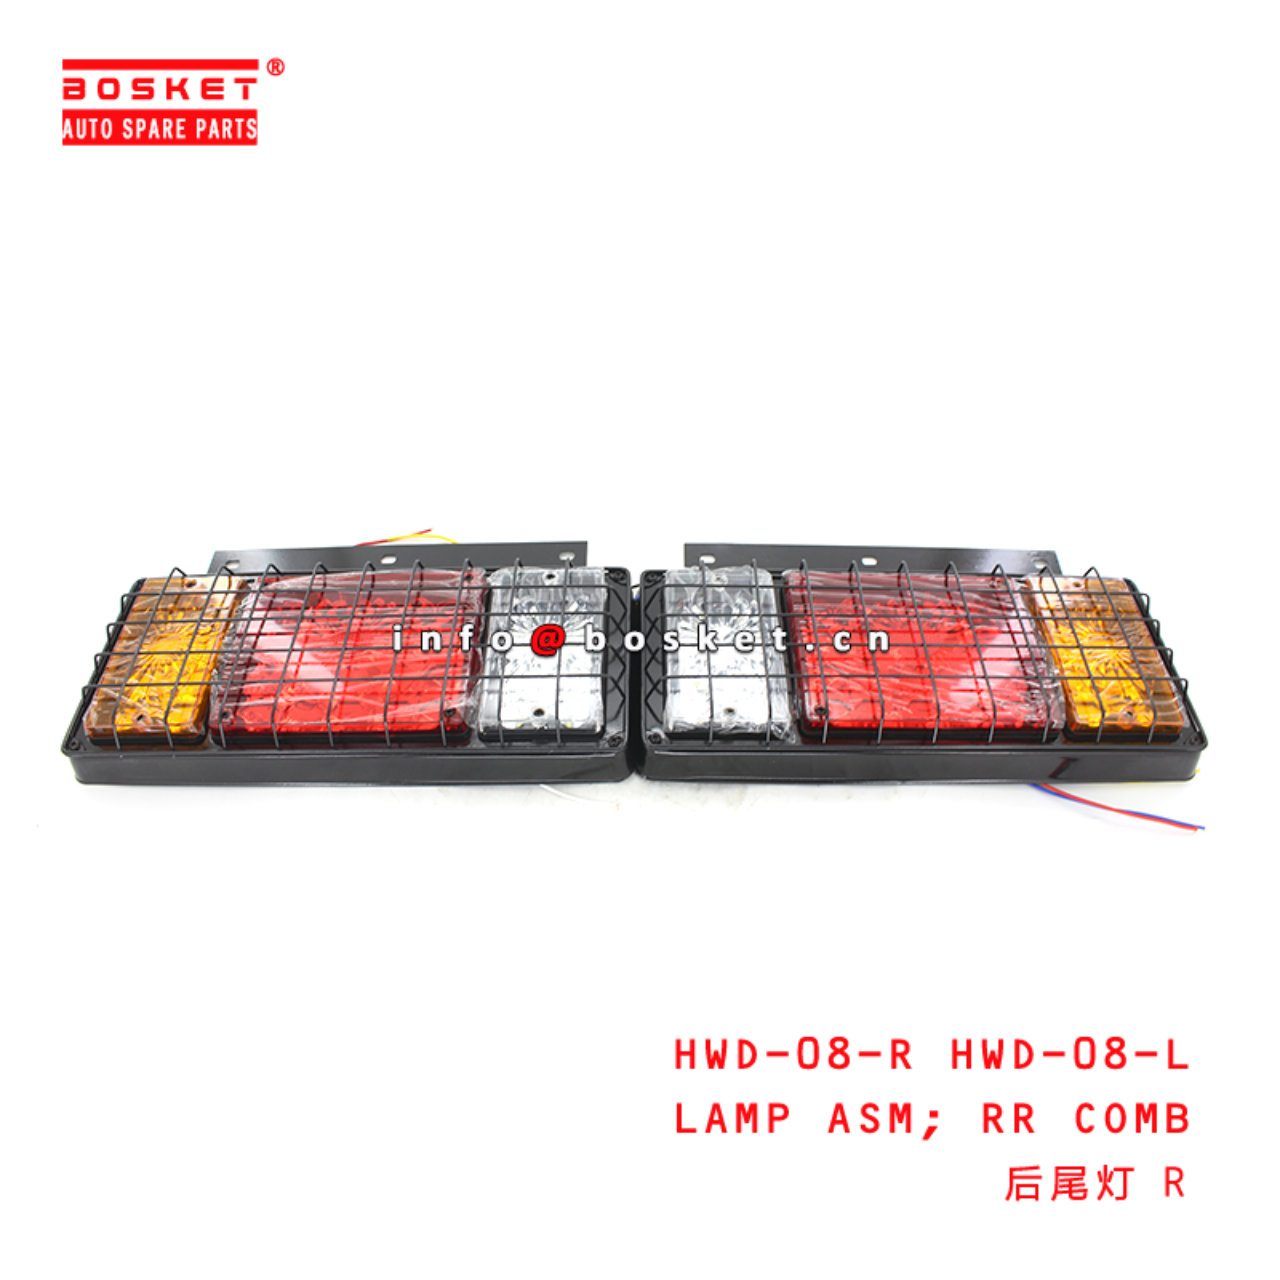 HWD-08-R HWD-08-L Rear Combination Lamp Assembly Suitable for ISUZU